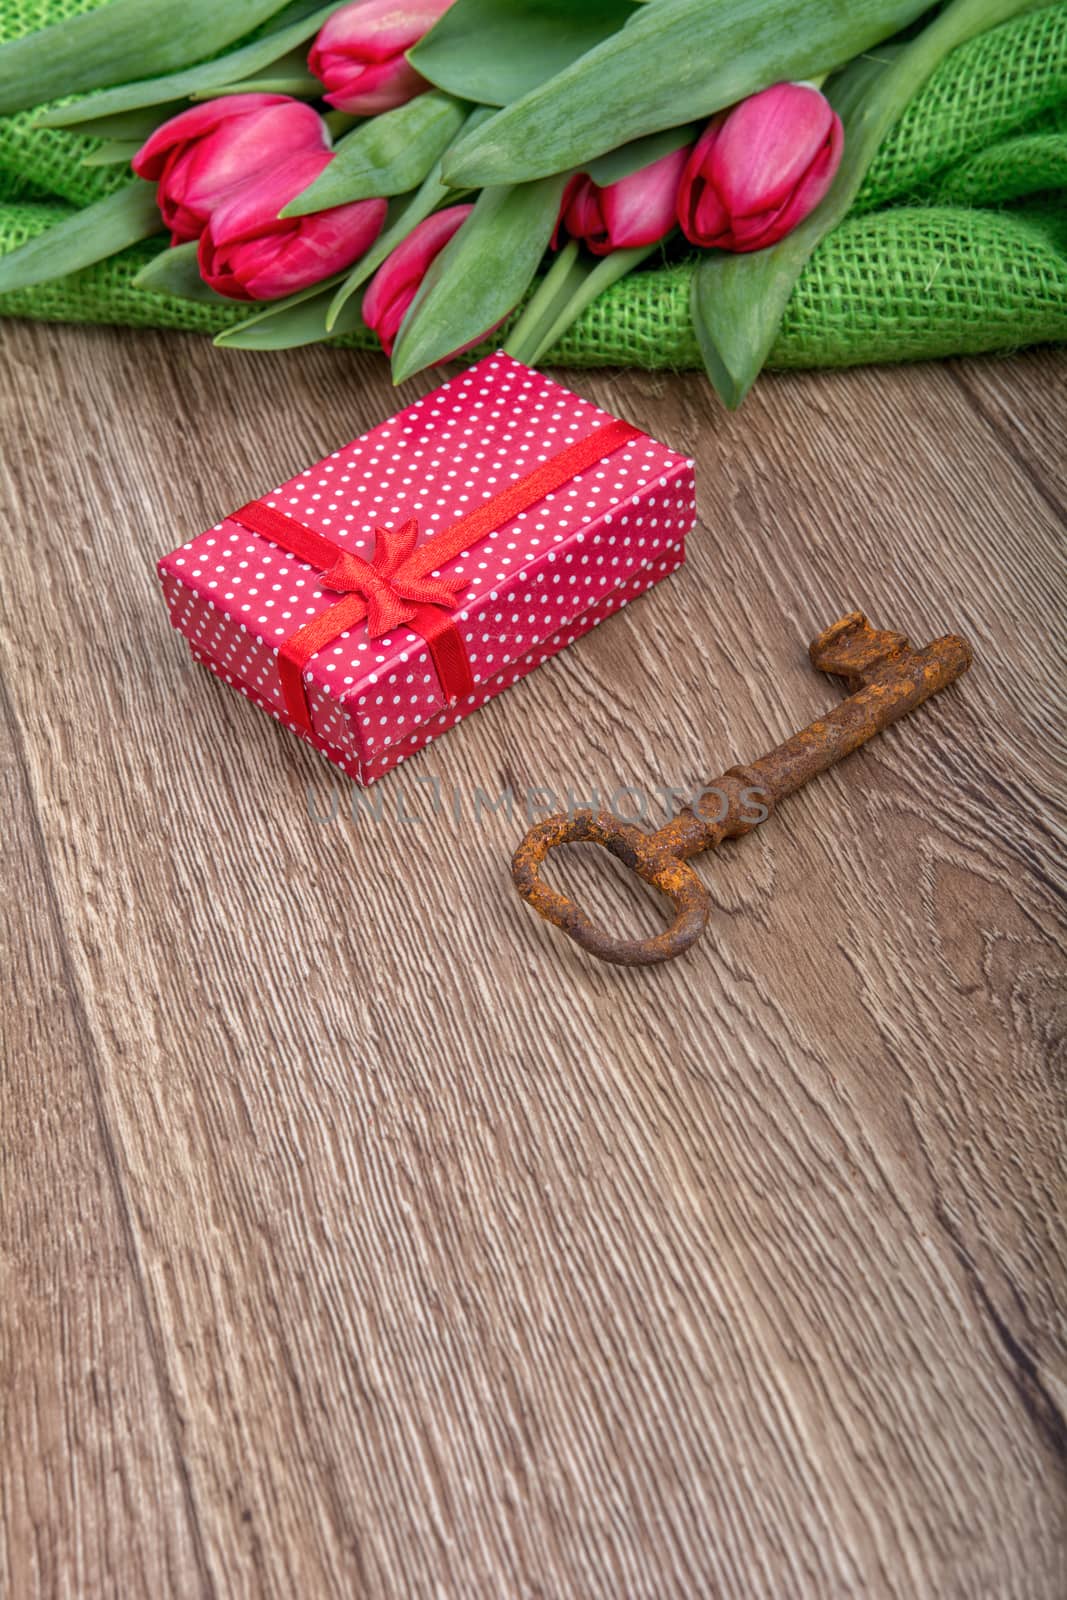 Red tulips, rusty key and red gift on a wooden background